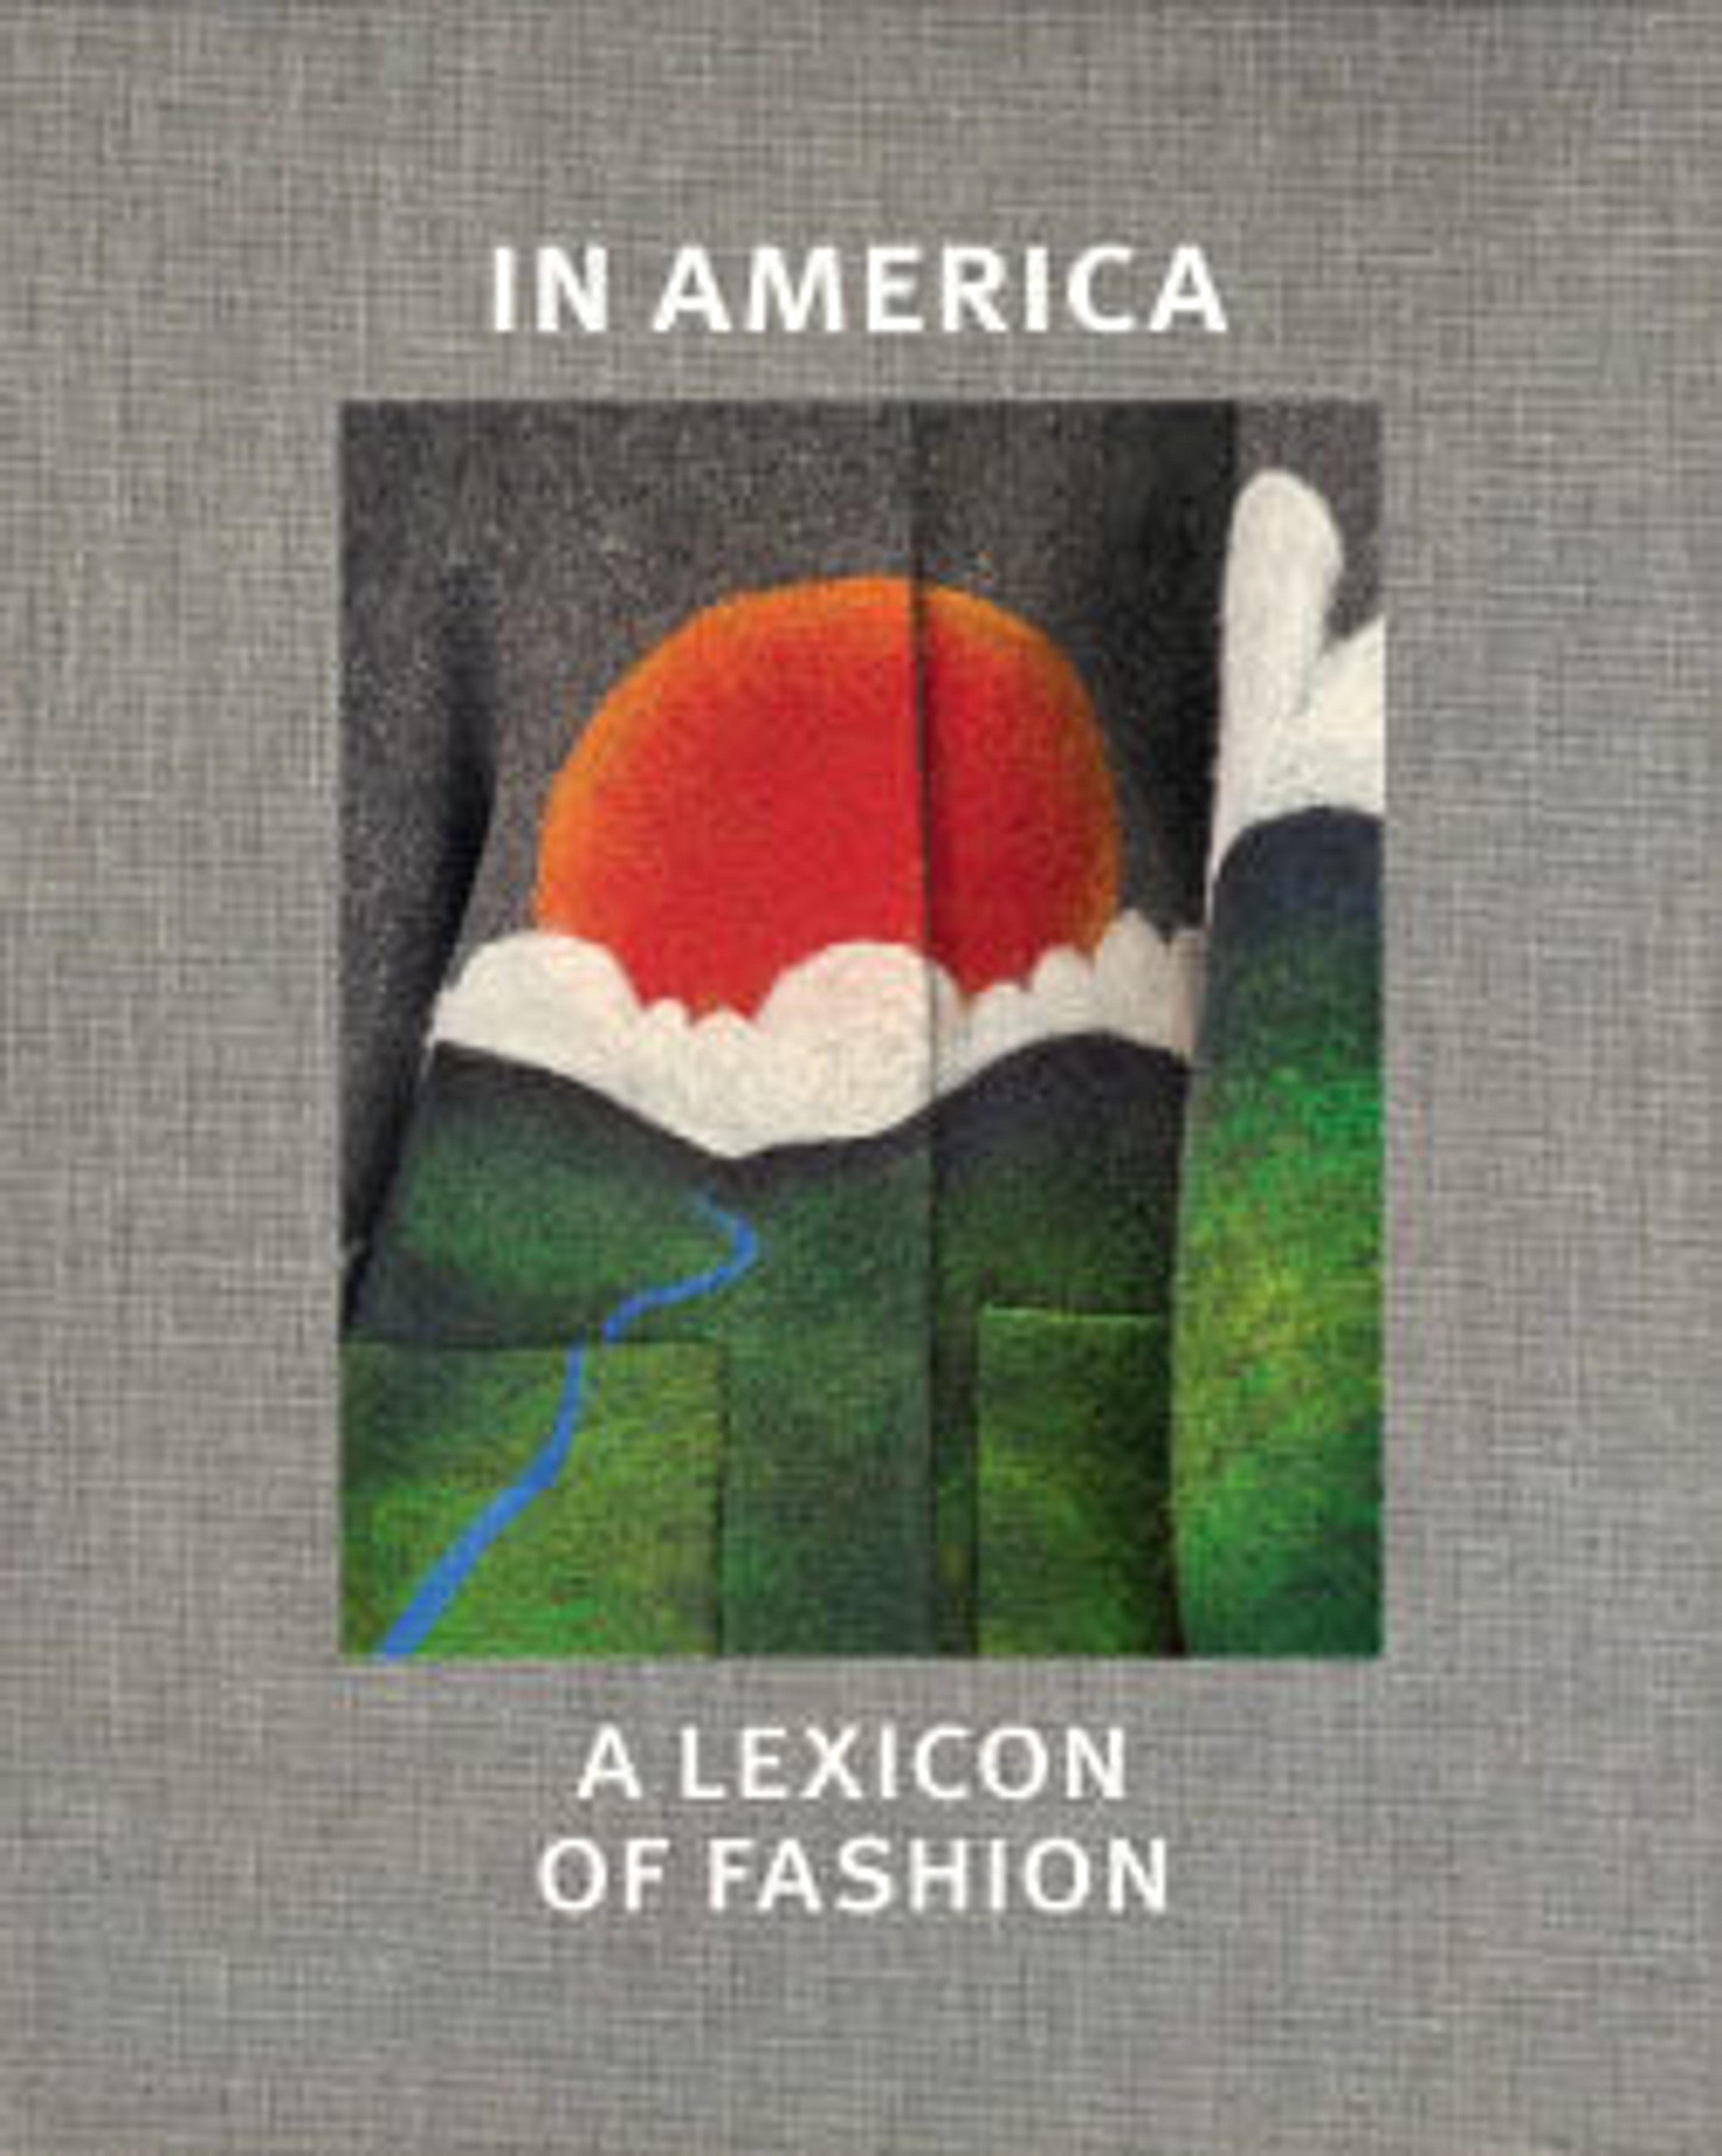 A clothing design of a sun behind clouds and a green landscape appears on a fabric garment surrounded by a fabric book cover with the title of the publication.